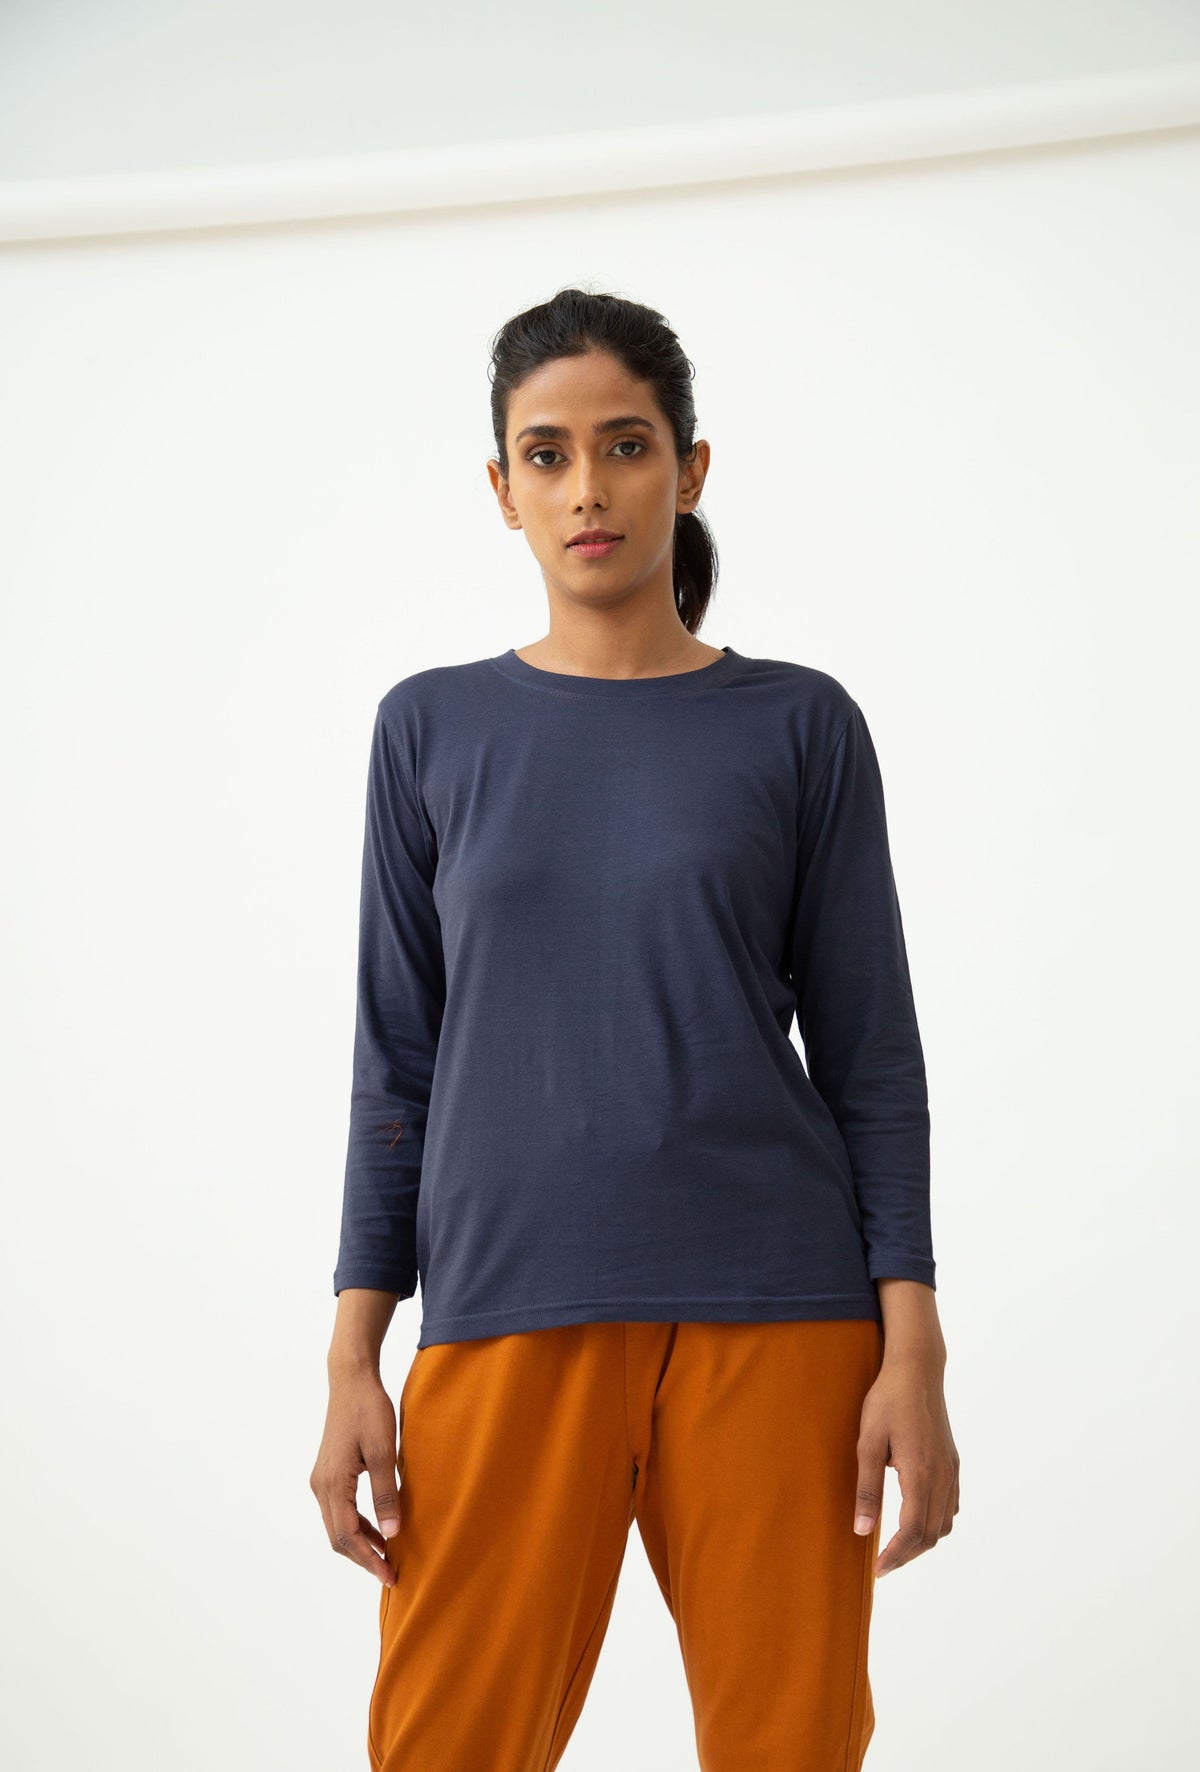 Saltpetre womens wear, lounge wear for casual wear.
 Comfortable crew neck, full sleeve t-shirt in navy blue colour. Made from 100% organic cotton.